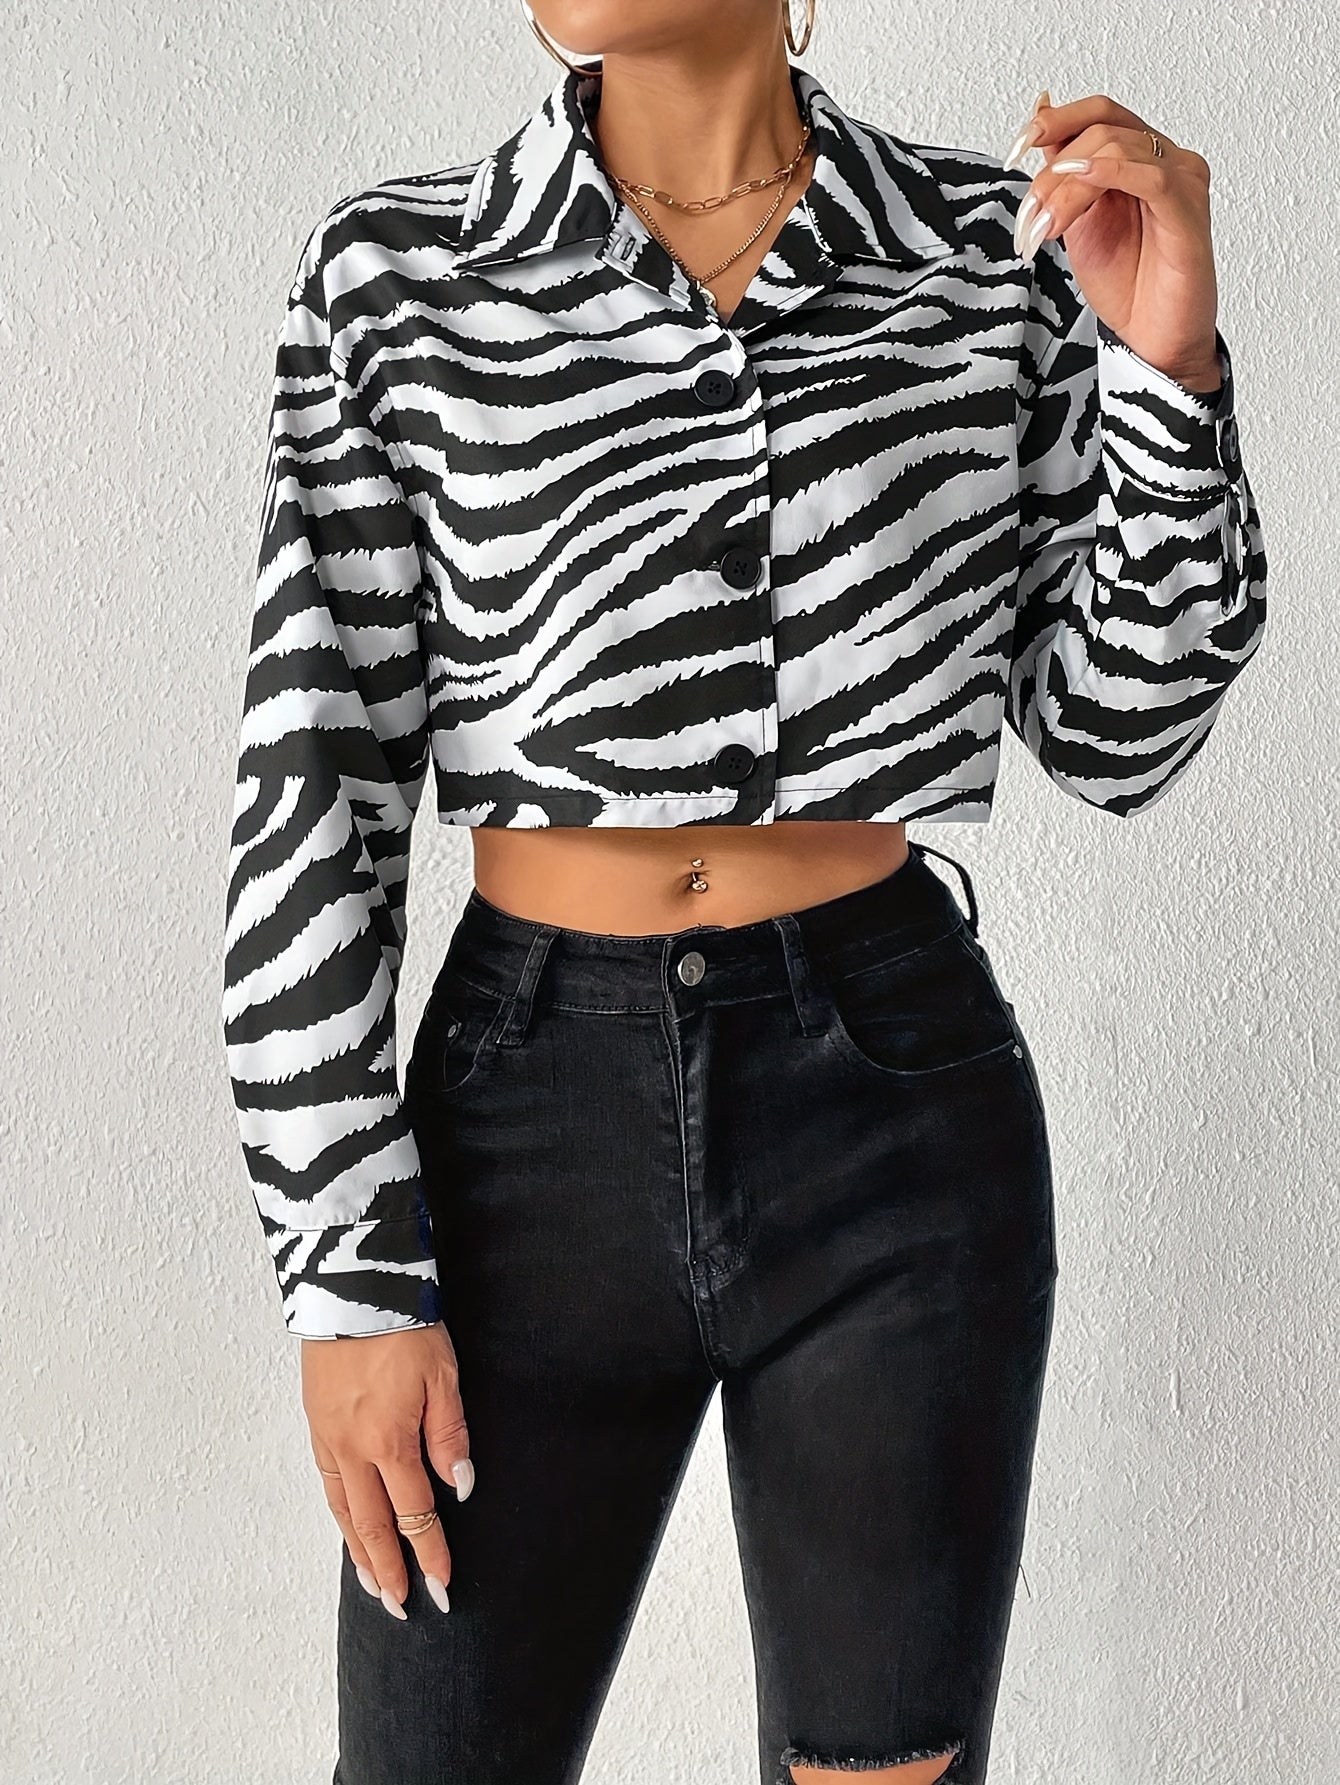 Antmvs Zebra Print Cropped Jacket, Casual Button Front Long Sleeve Outerwear, Women's Clothing